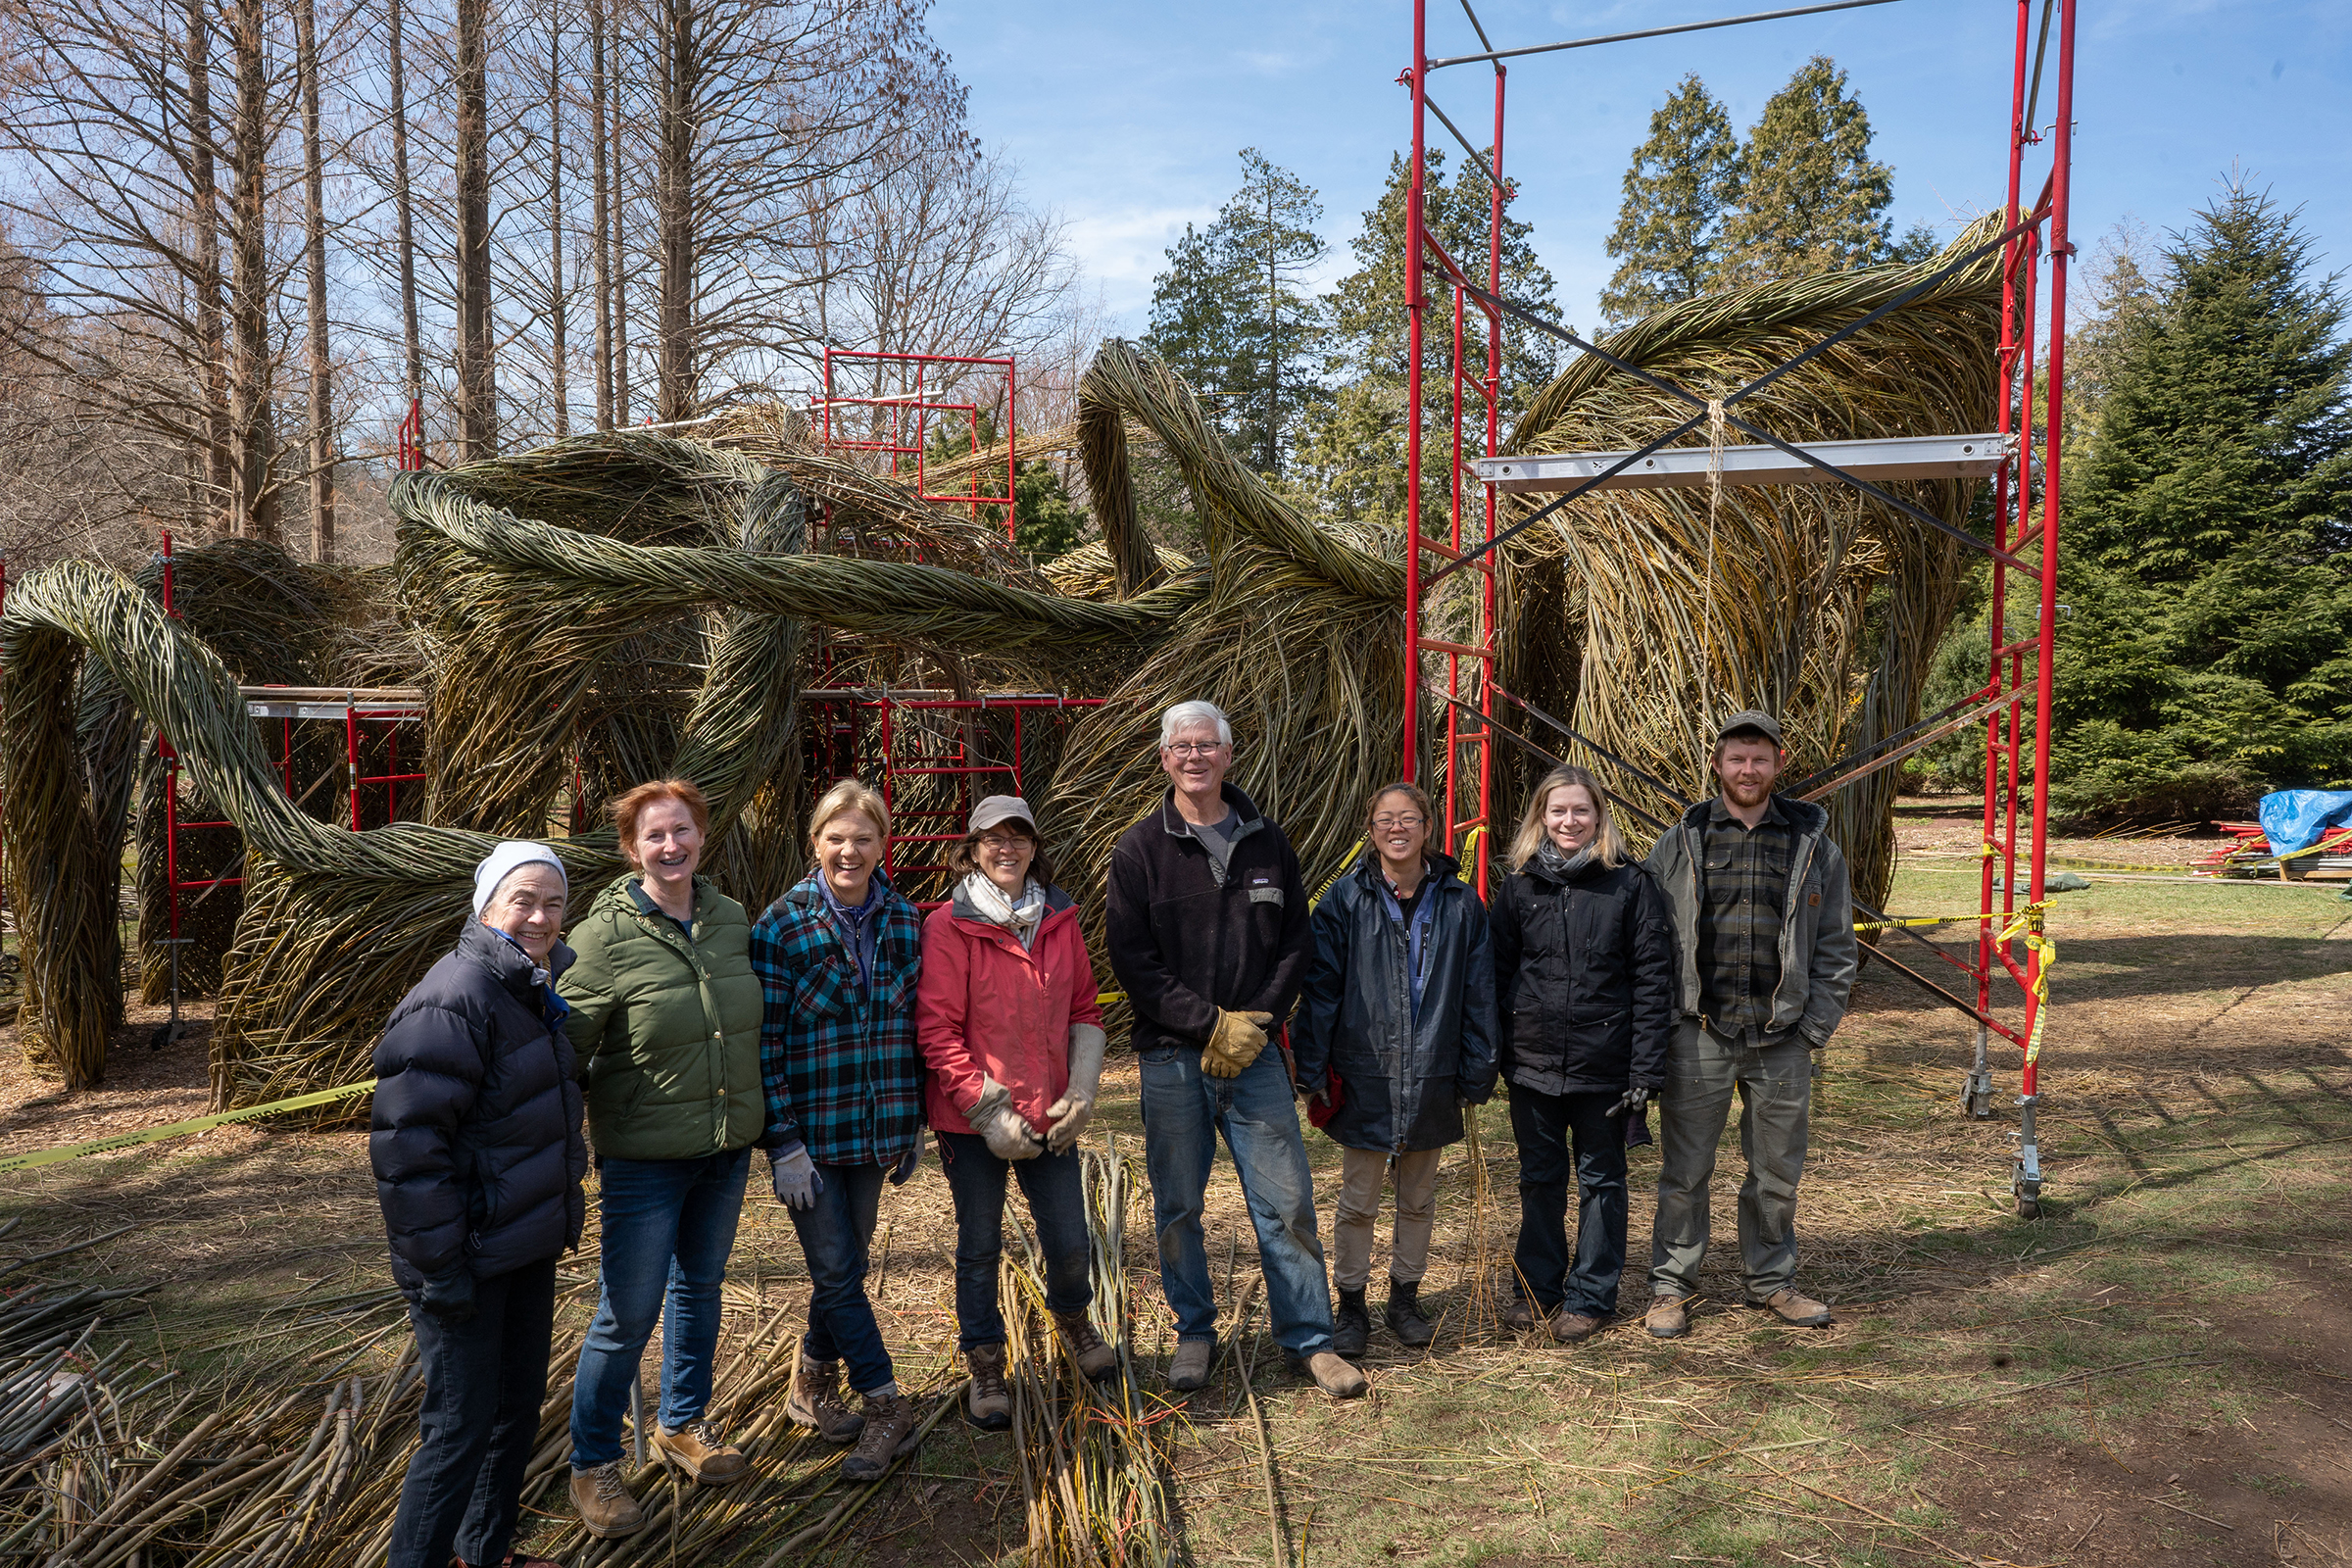 Patrick Dougherty with teammates and a work-in-progress sculpture